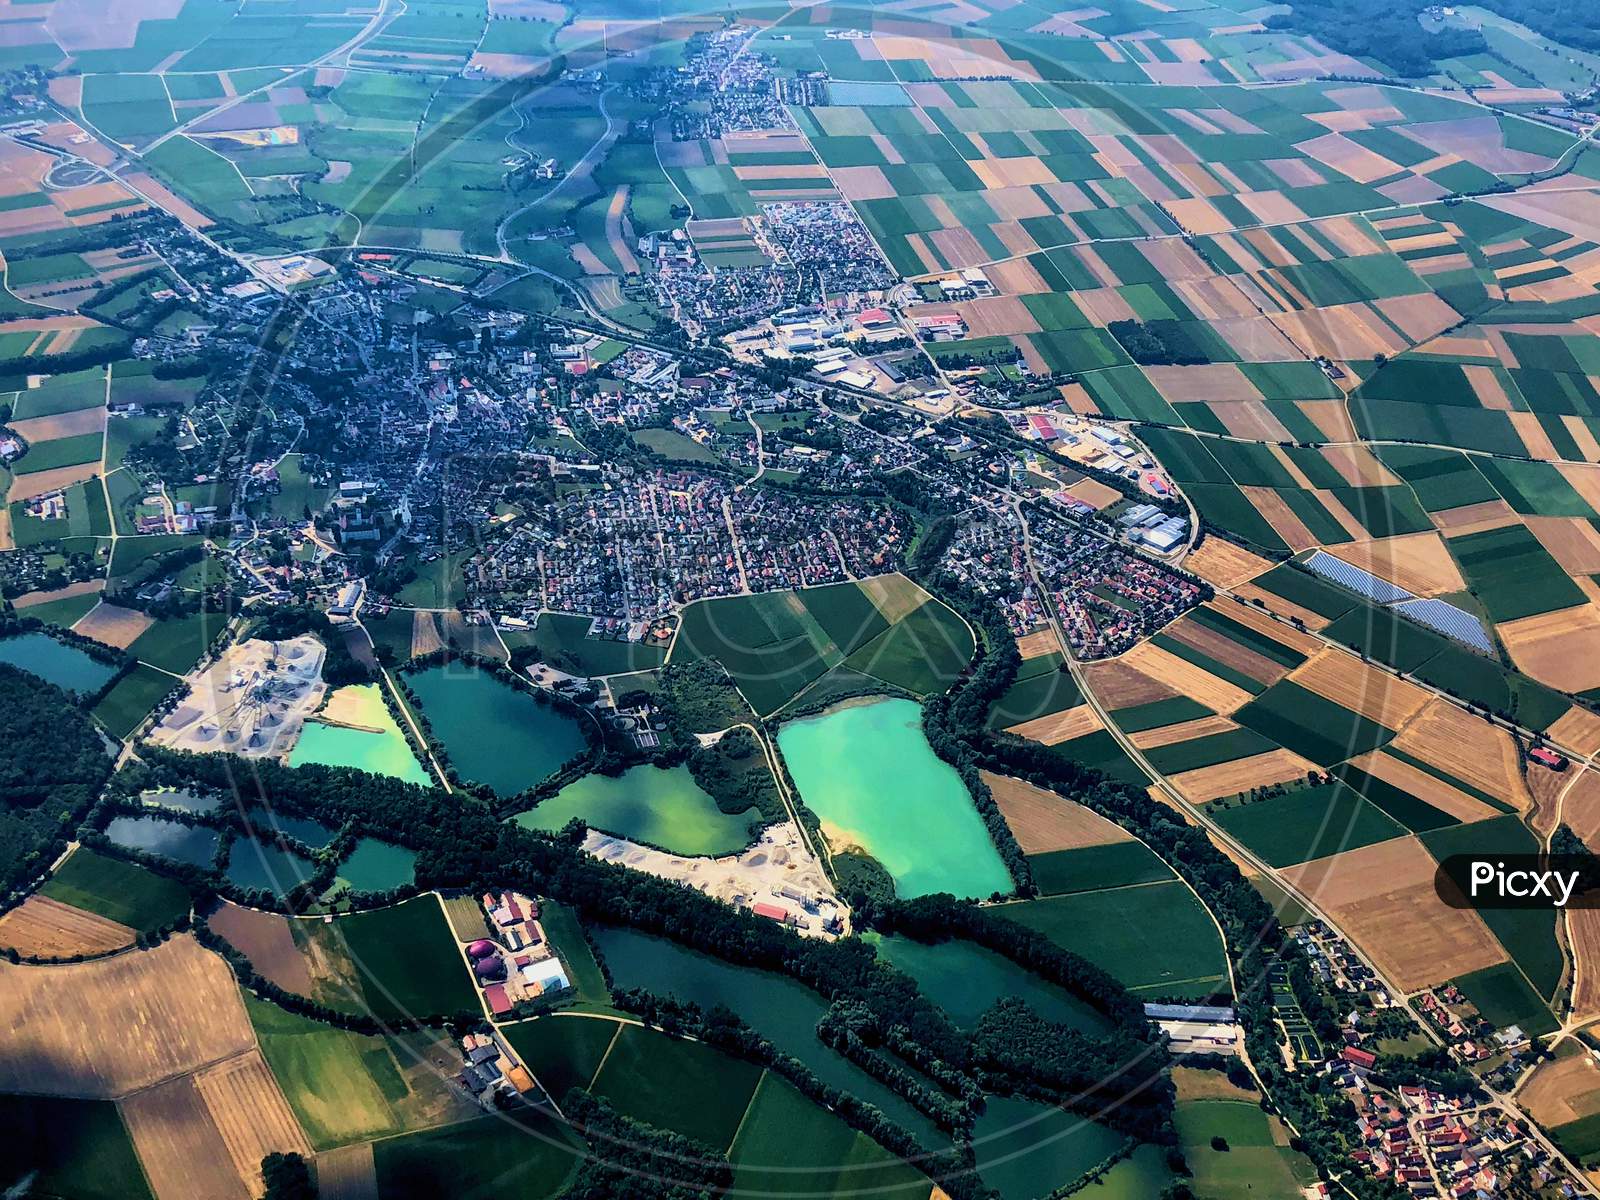 Bavarias pretty countryside during a flight in a propeller plane 27.7.2018